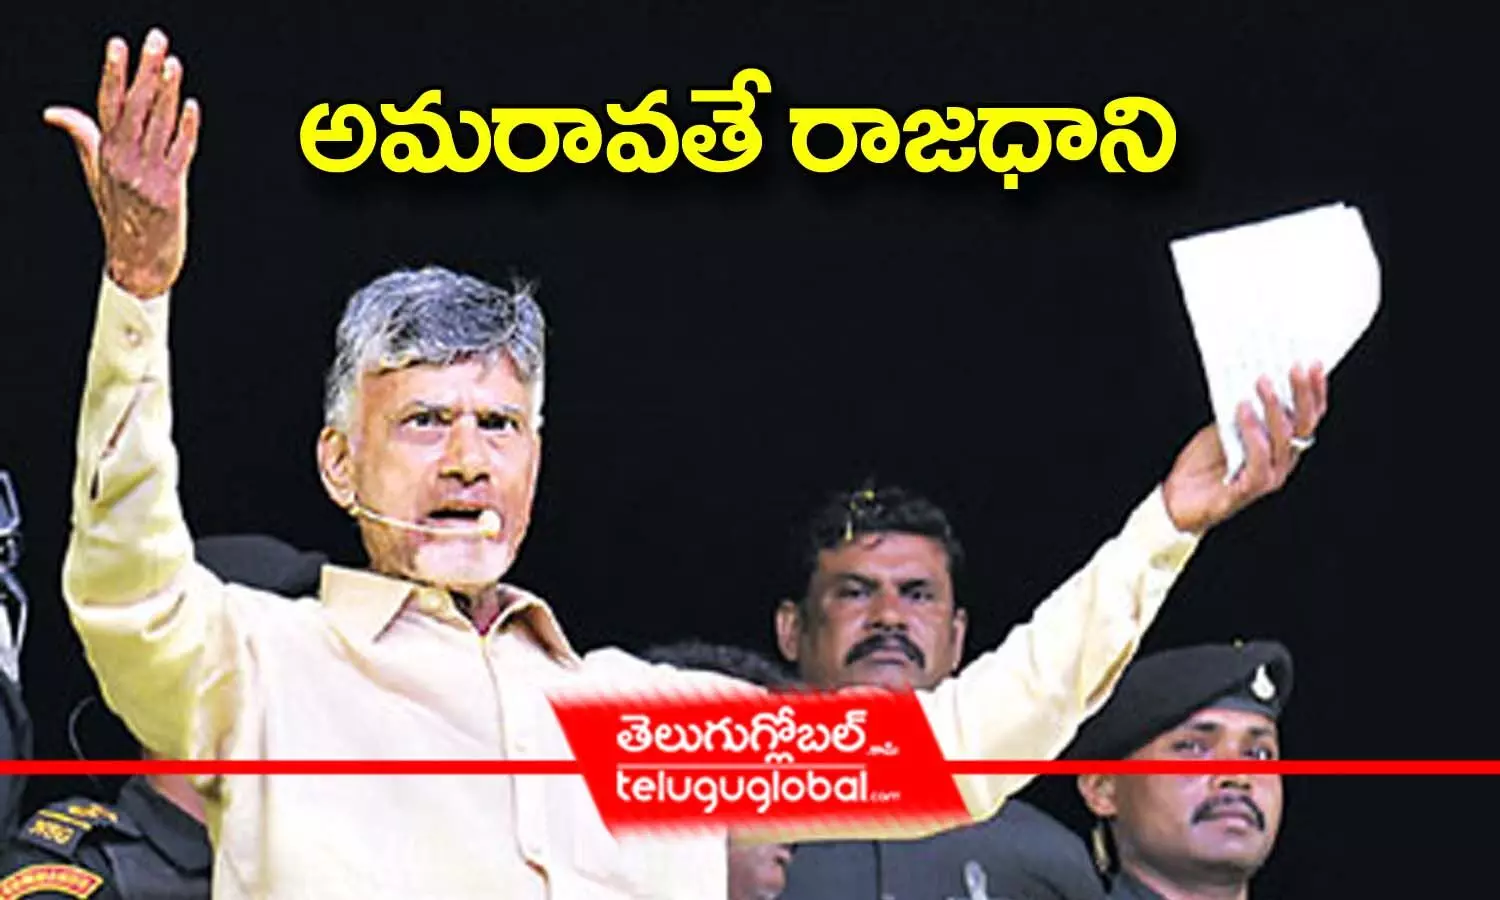 Chandrababu announced that Amaravati will continue as the capital of TDP comes to power